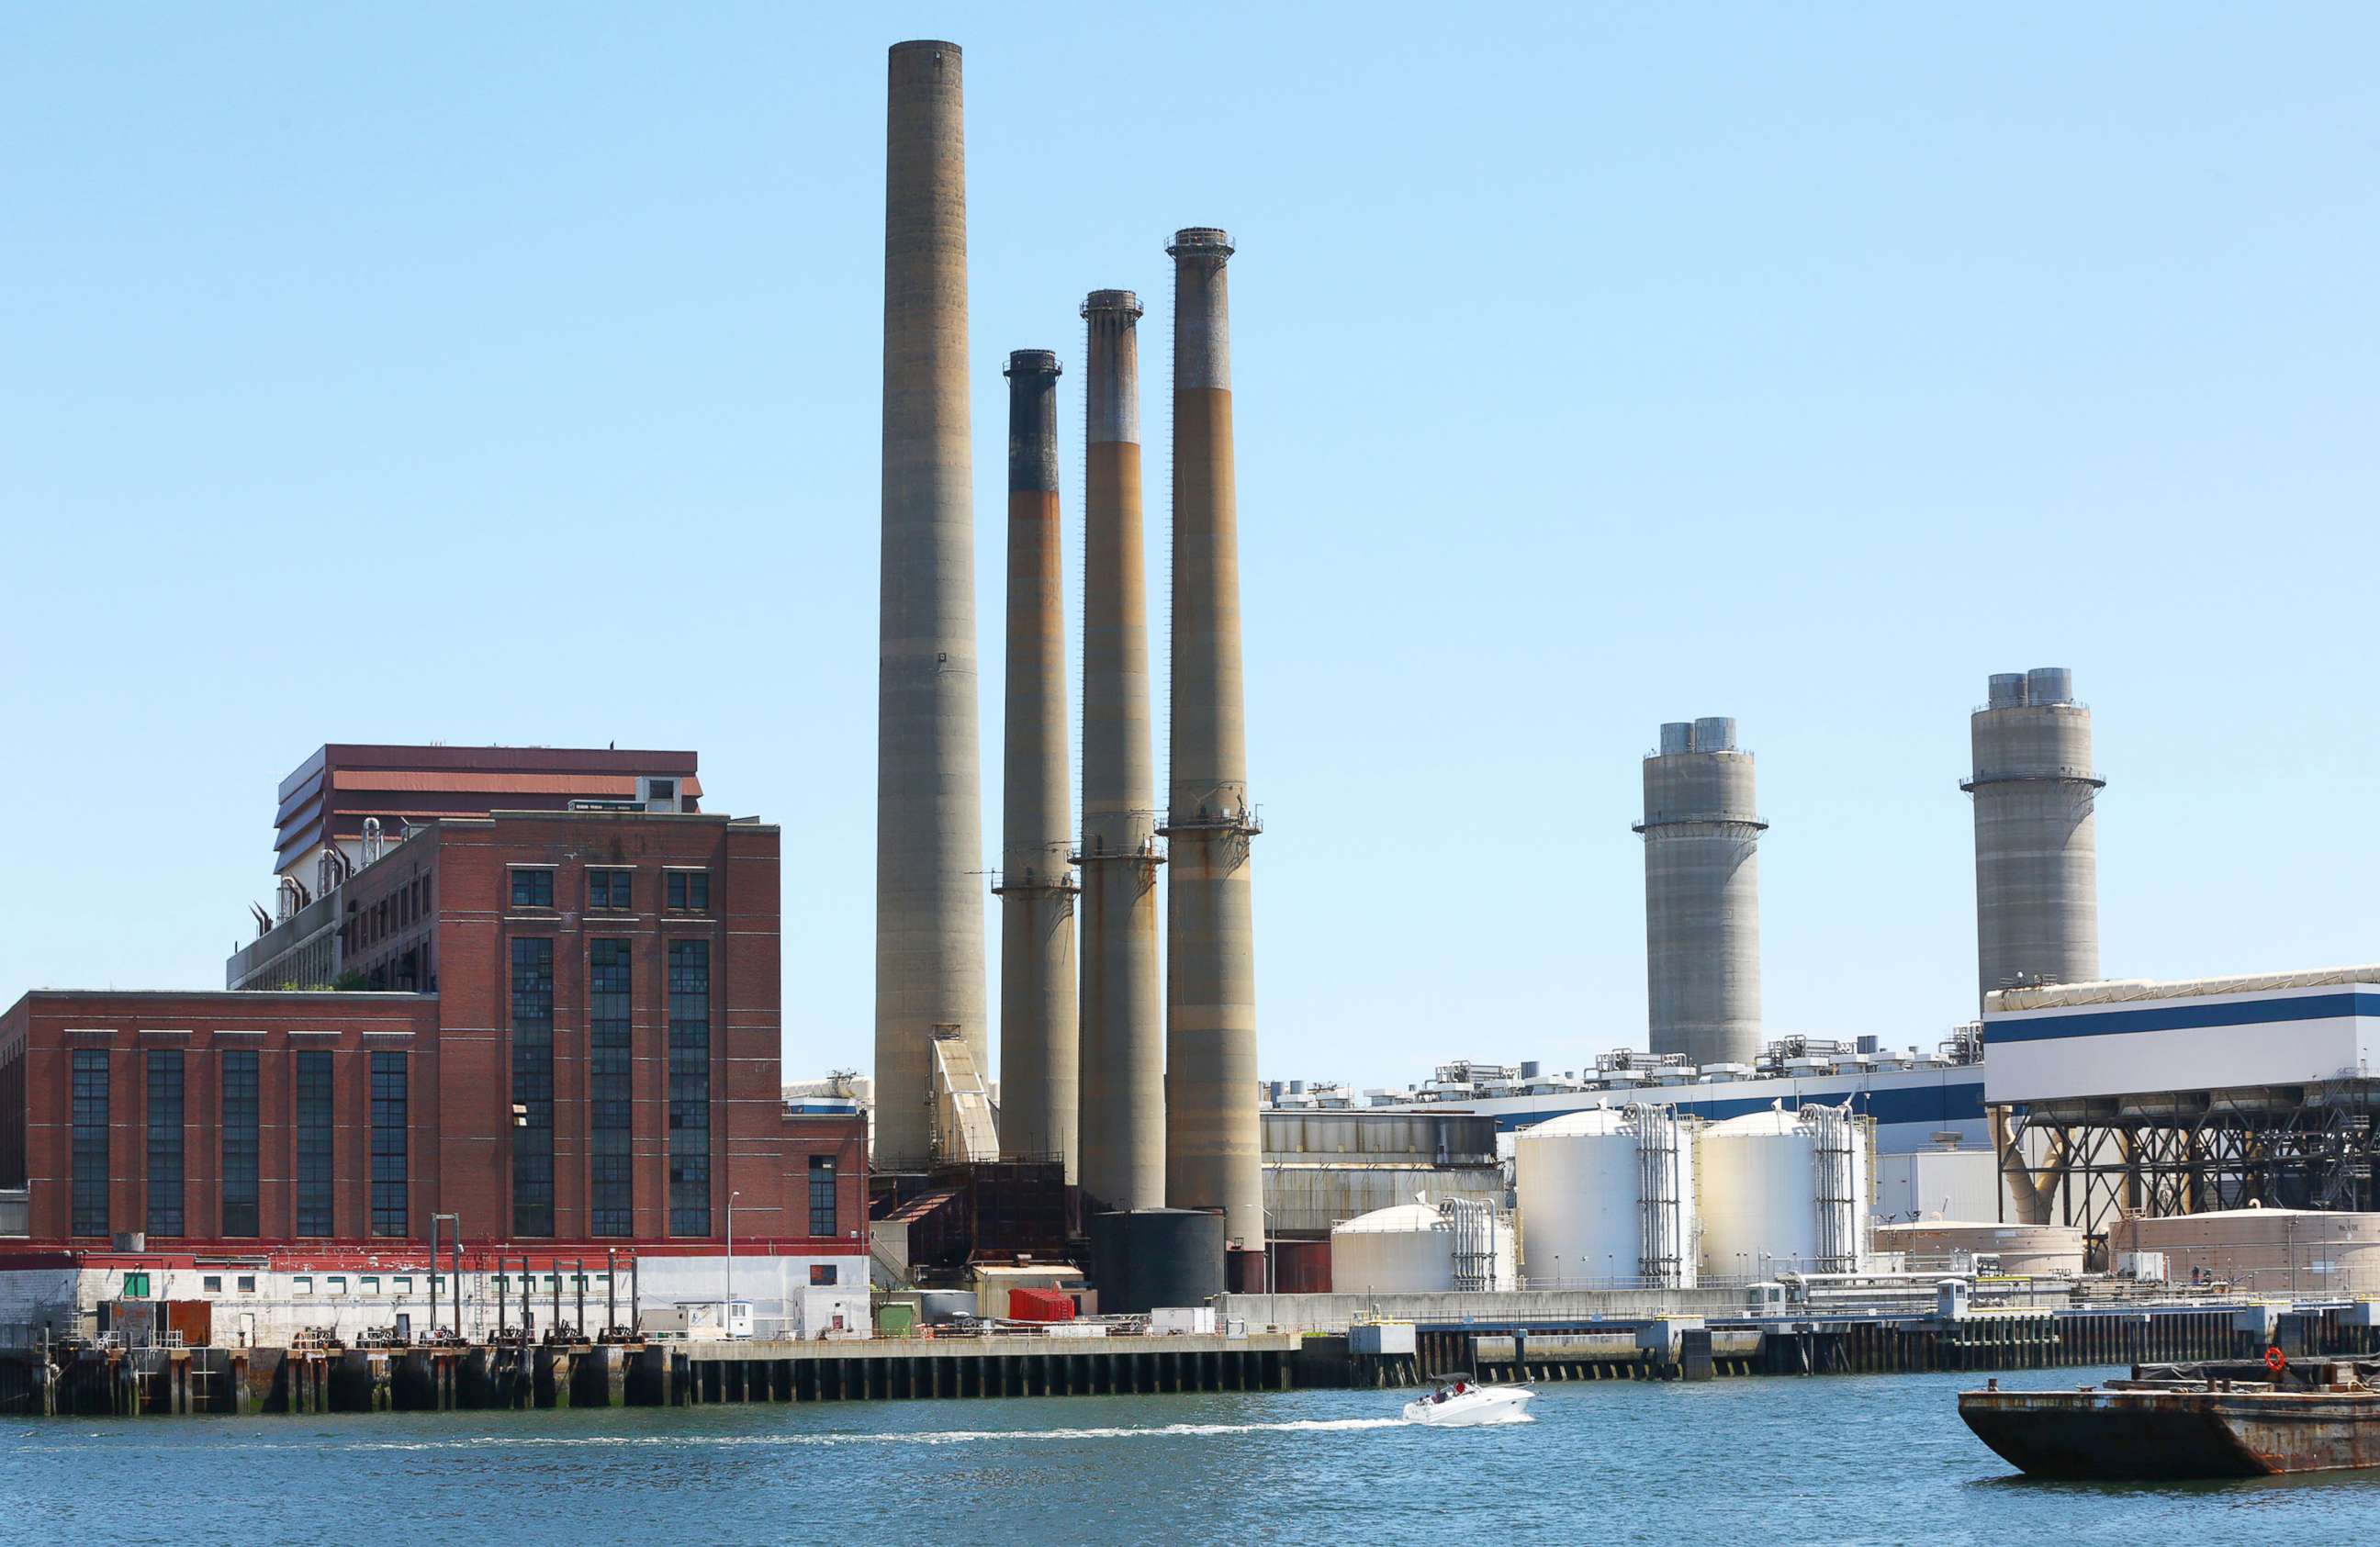 PHOTO: In this June 14, 2020, file photo, the Mystic Generating Station is shown in Everett, near Boston, MA., on June 14, 2020.